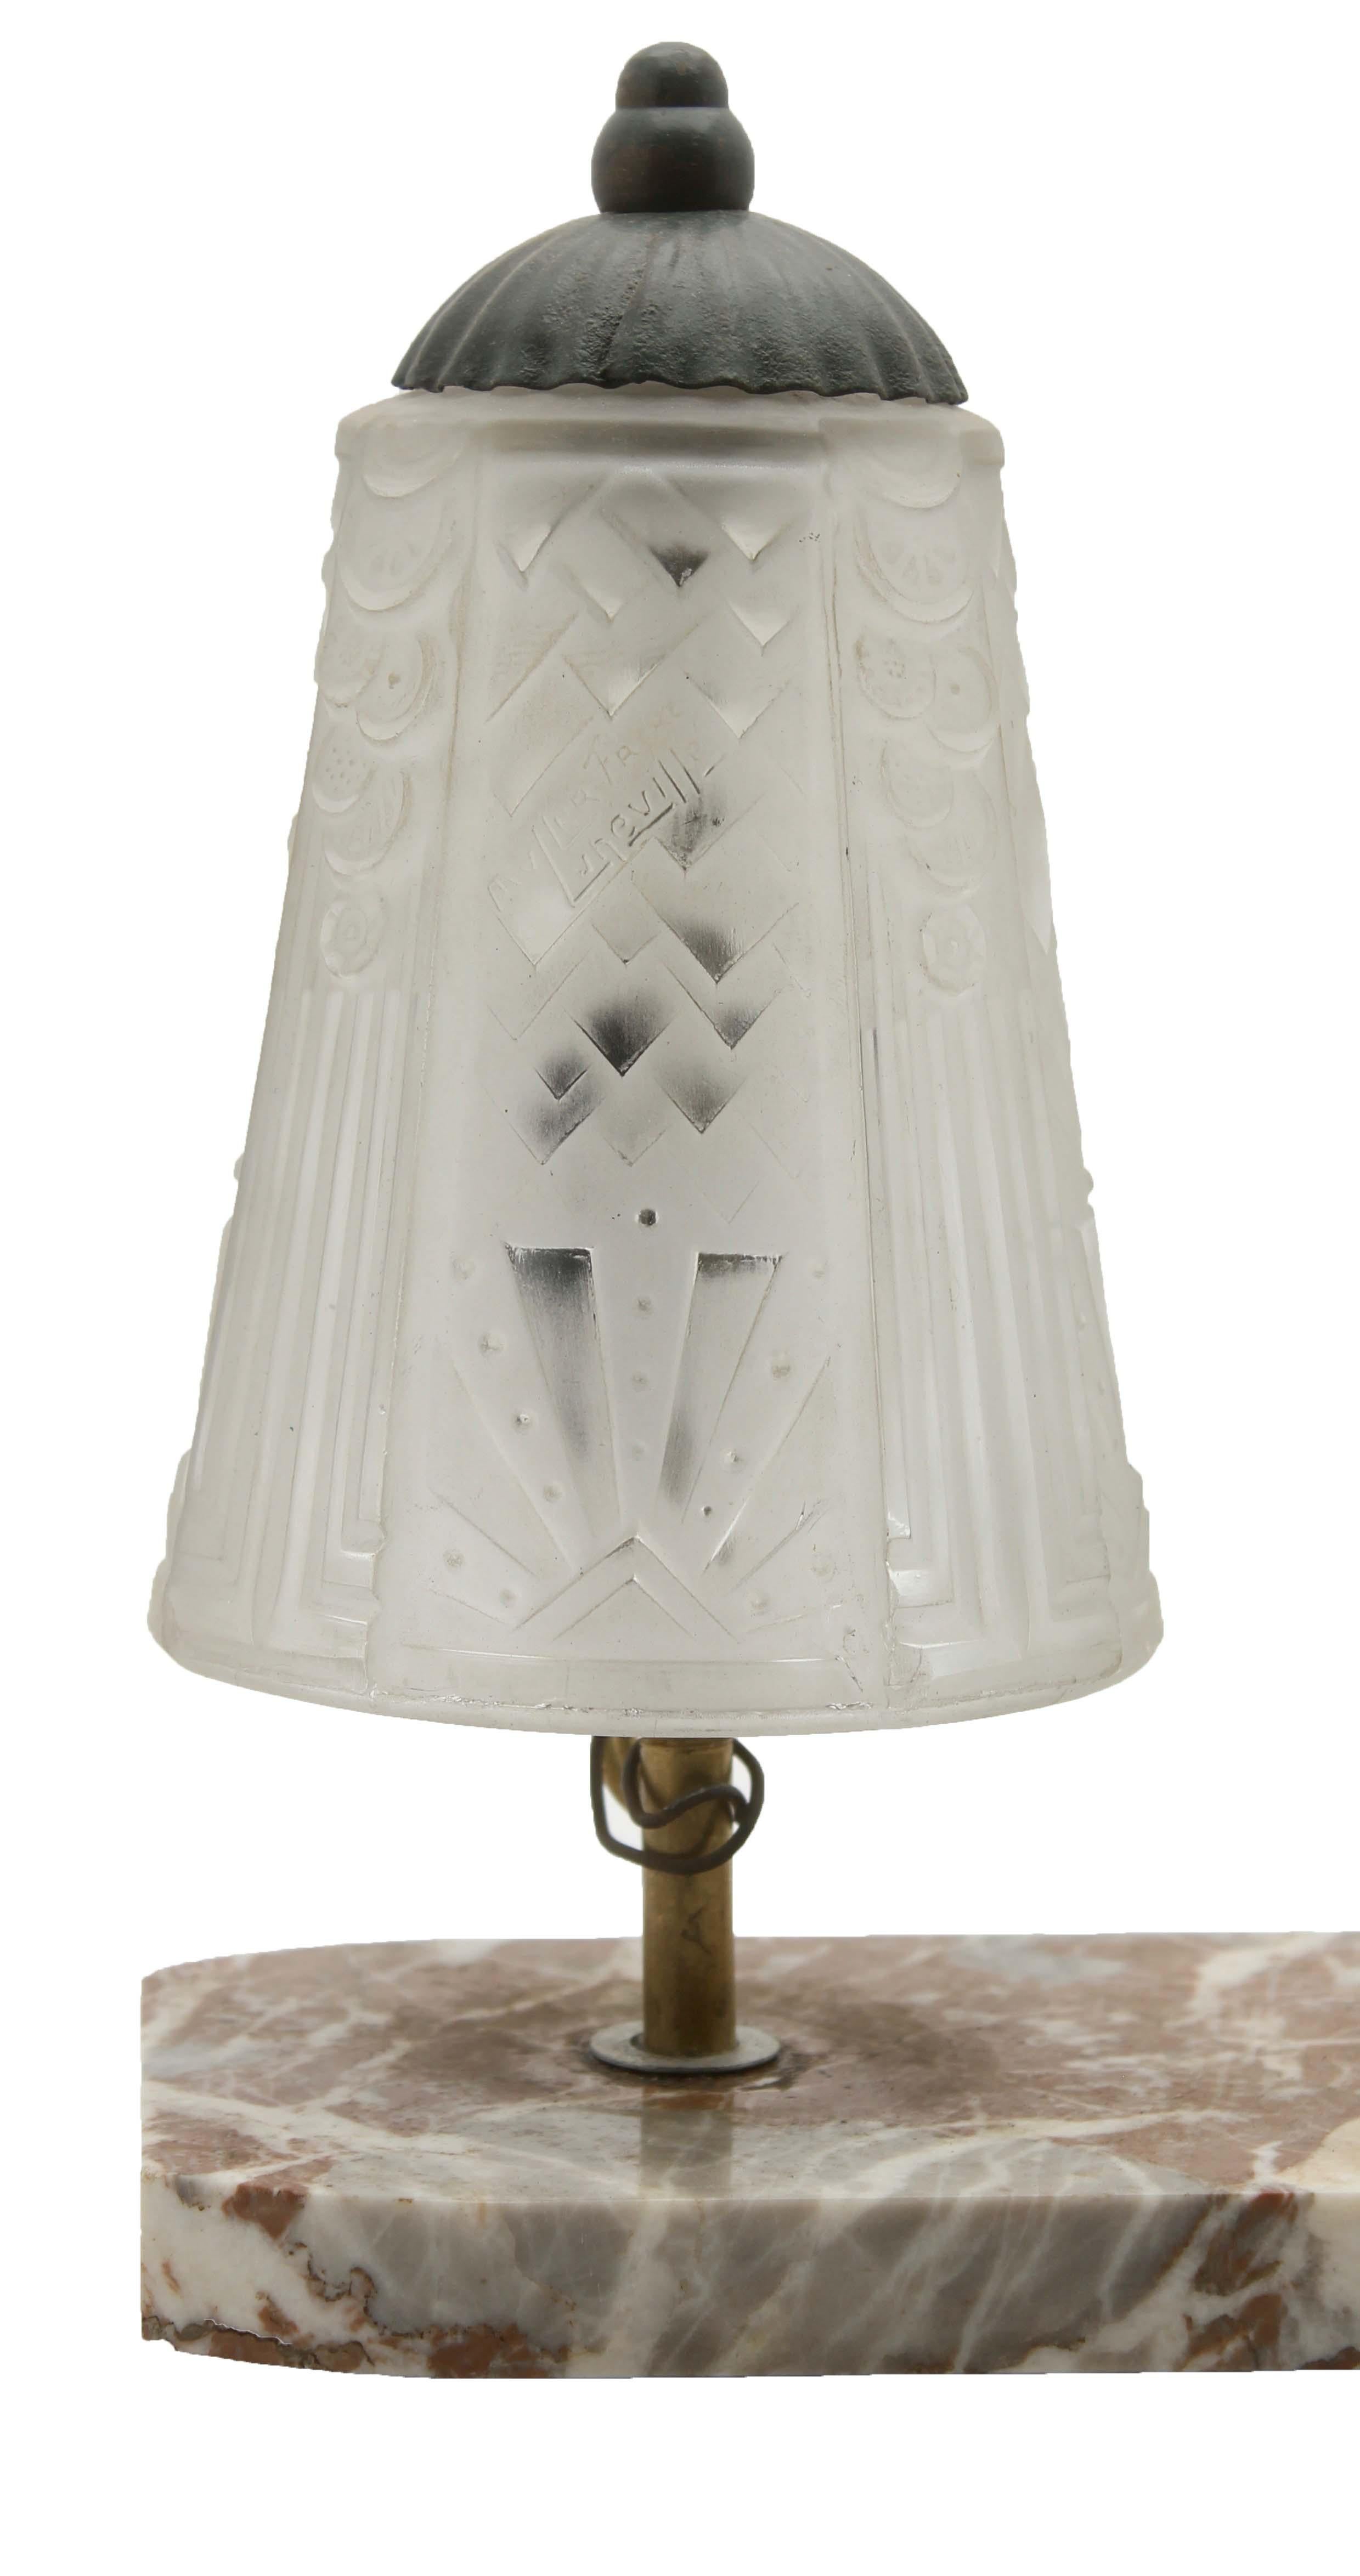 Hand-Crafted French Art Deco Table Lamp Signed by Muller Frères with Bronze Elephant Motif